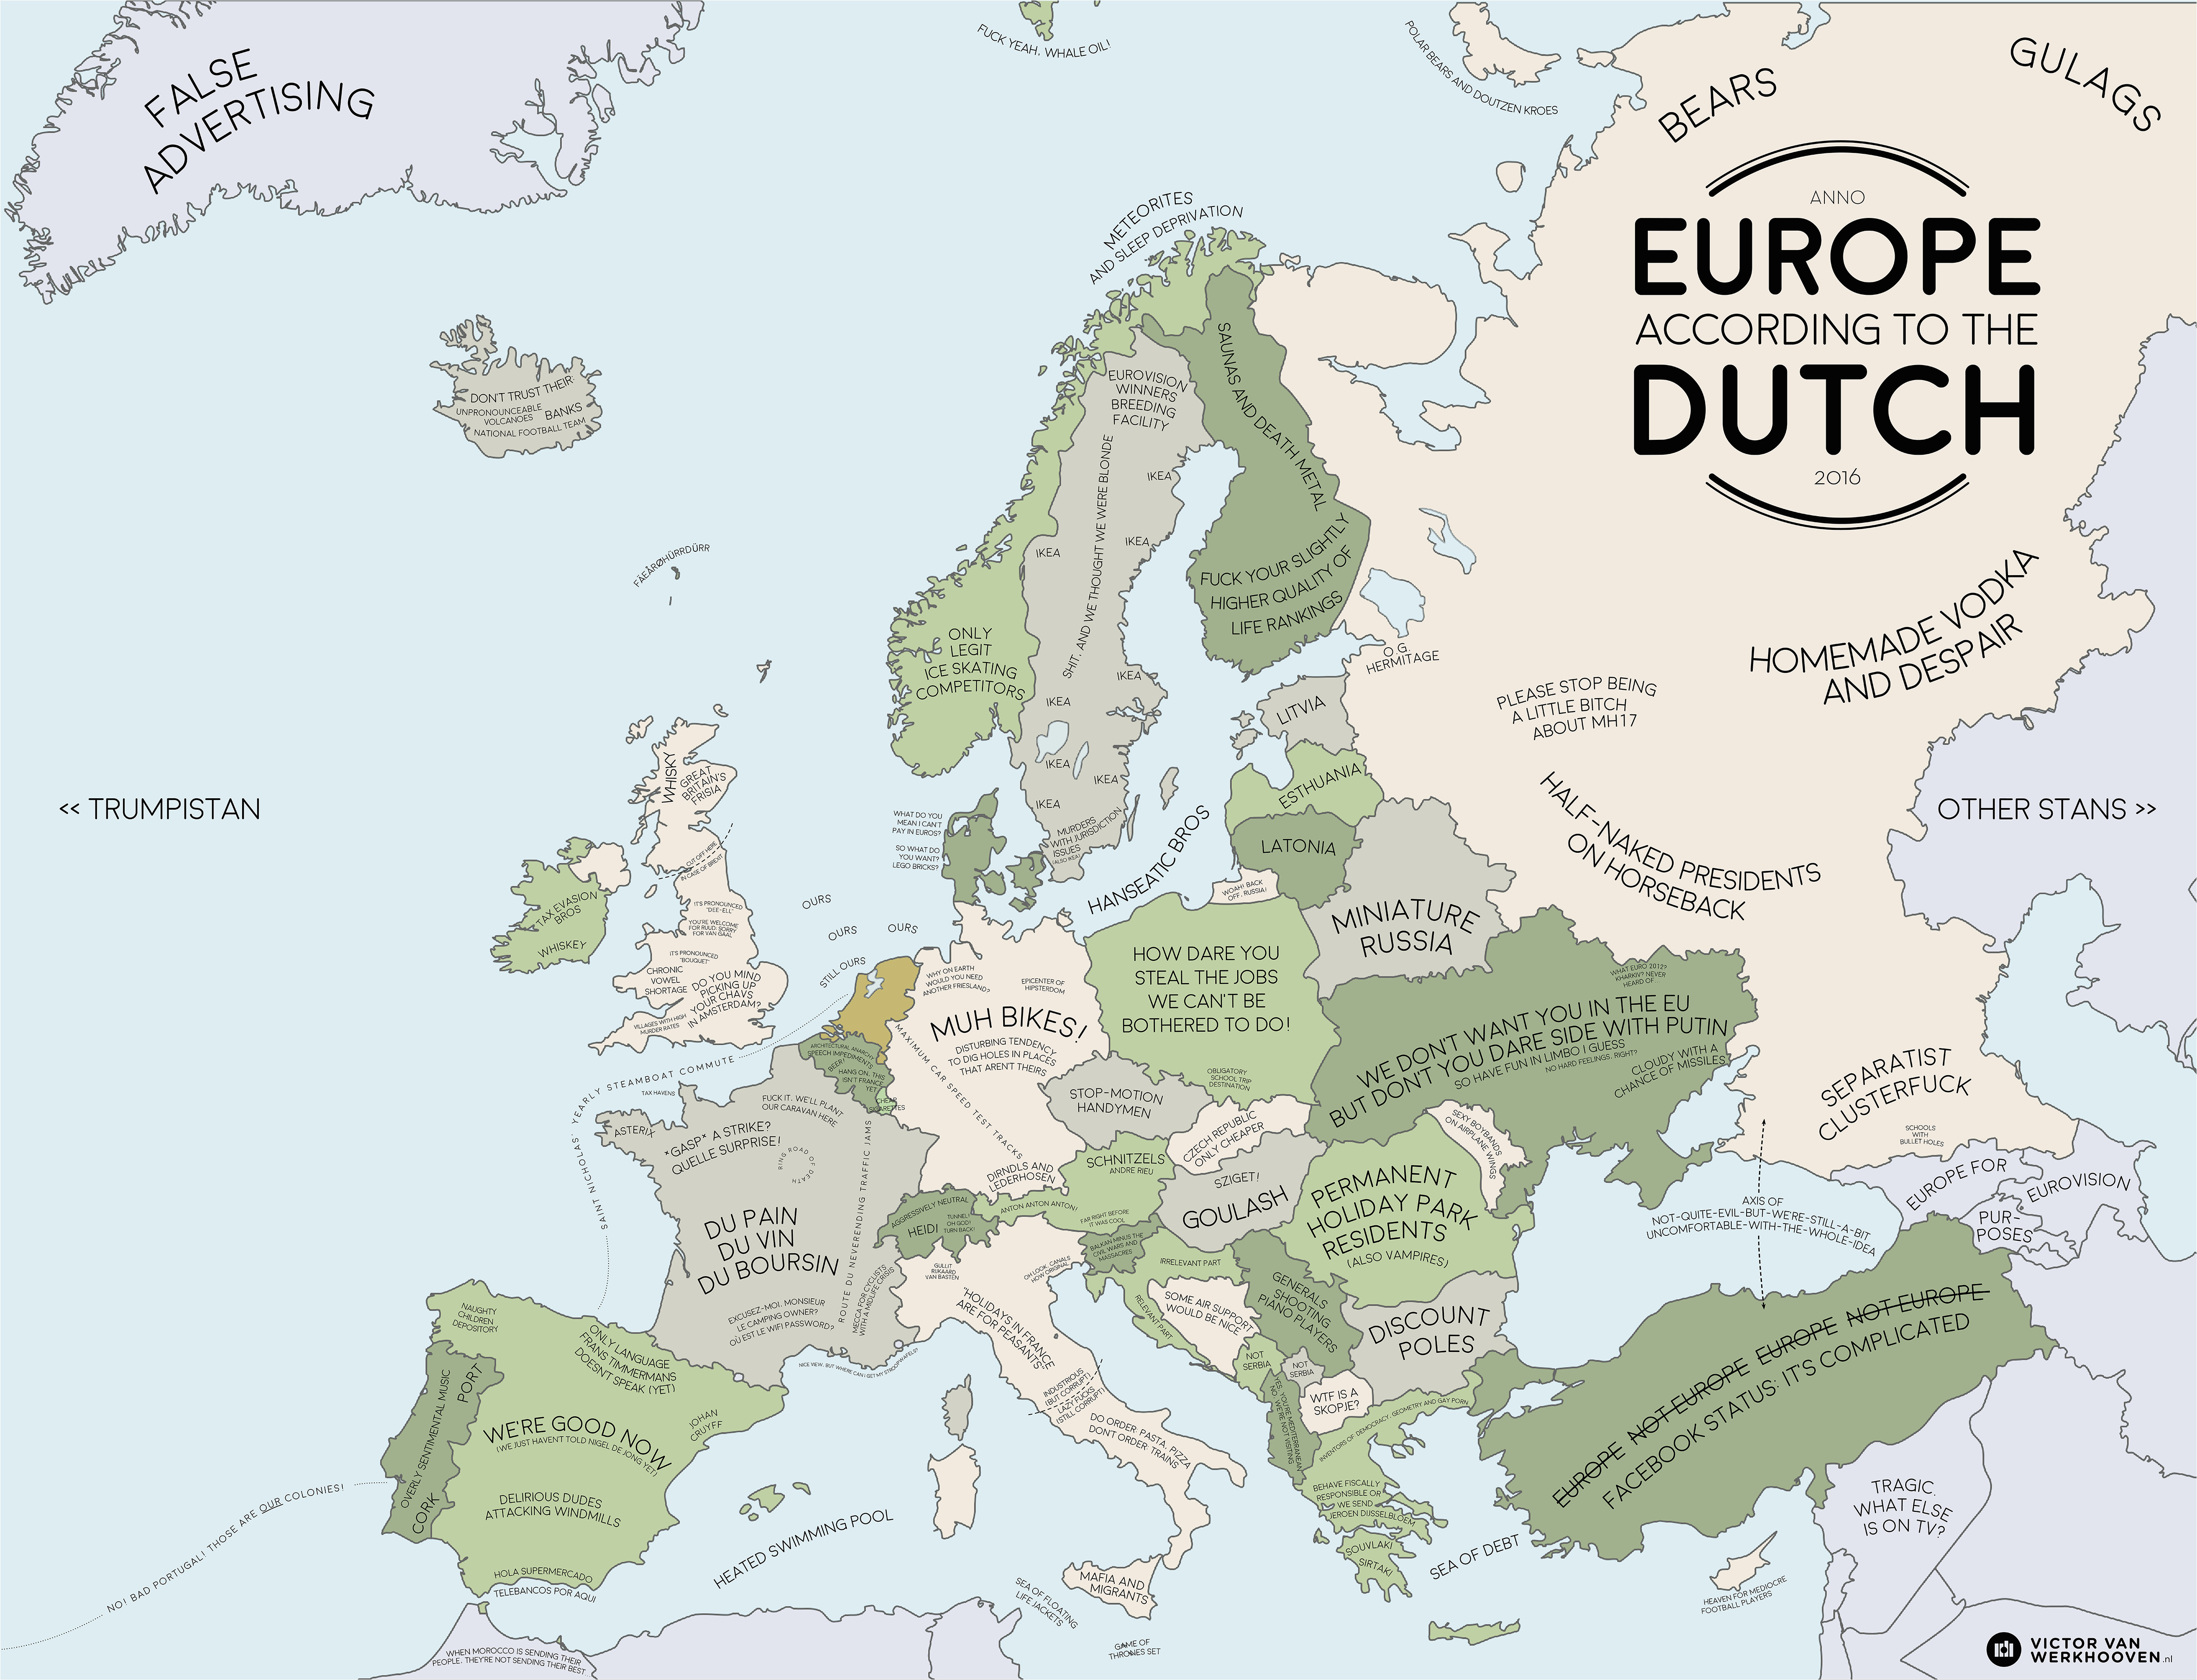 Vatican City On Europe Map Europe According to the Dutch Europe Map Europe Dutch